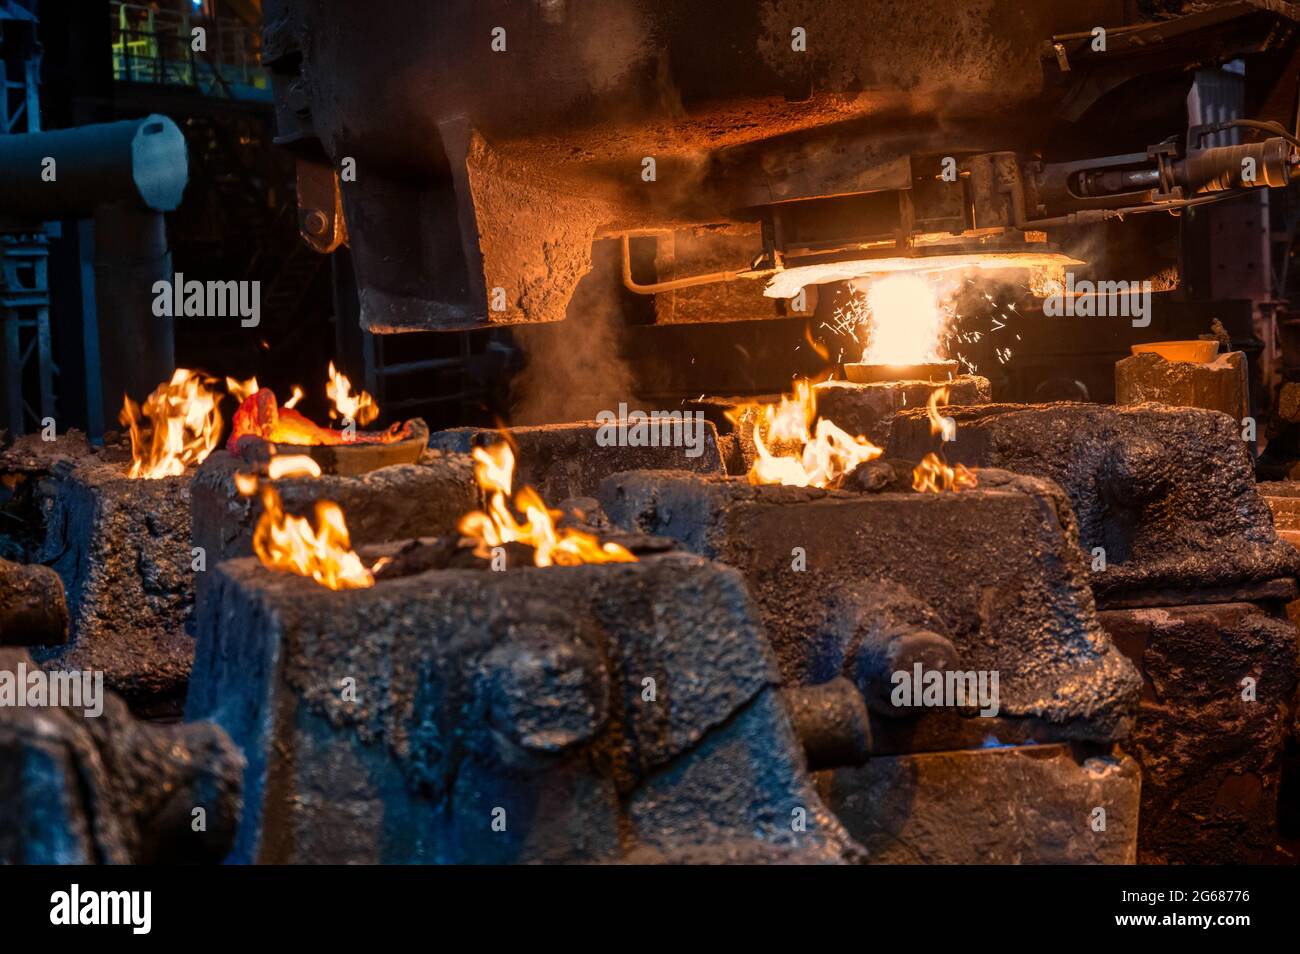 Steel molds for metal pouring. A fire burns at the top of the molds Stock Photo